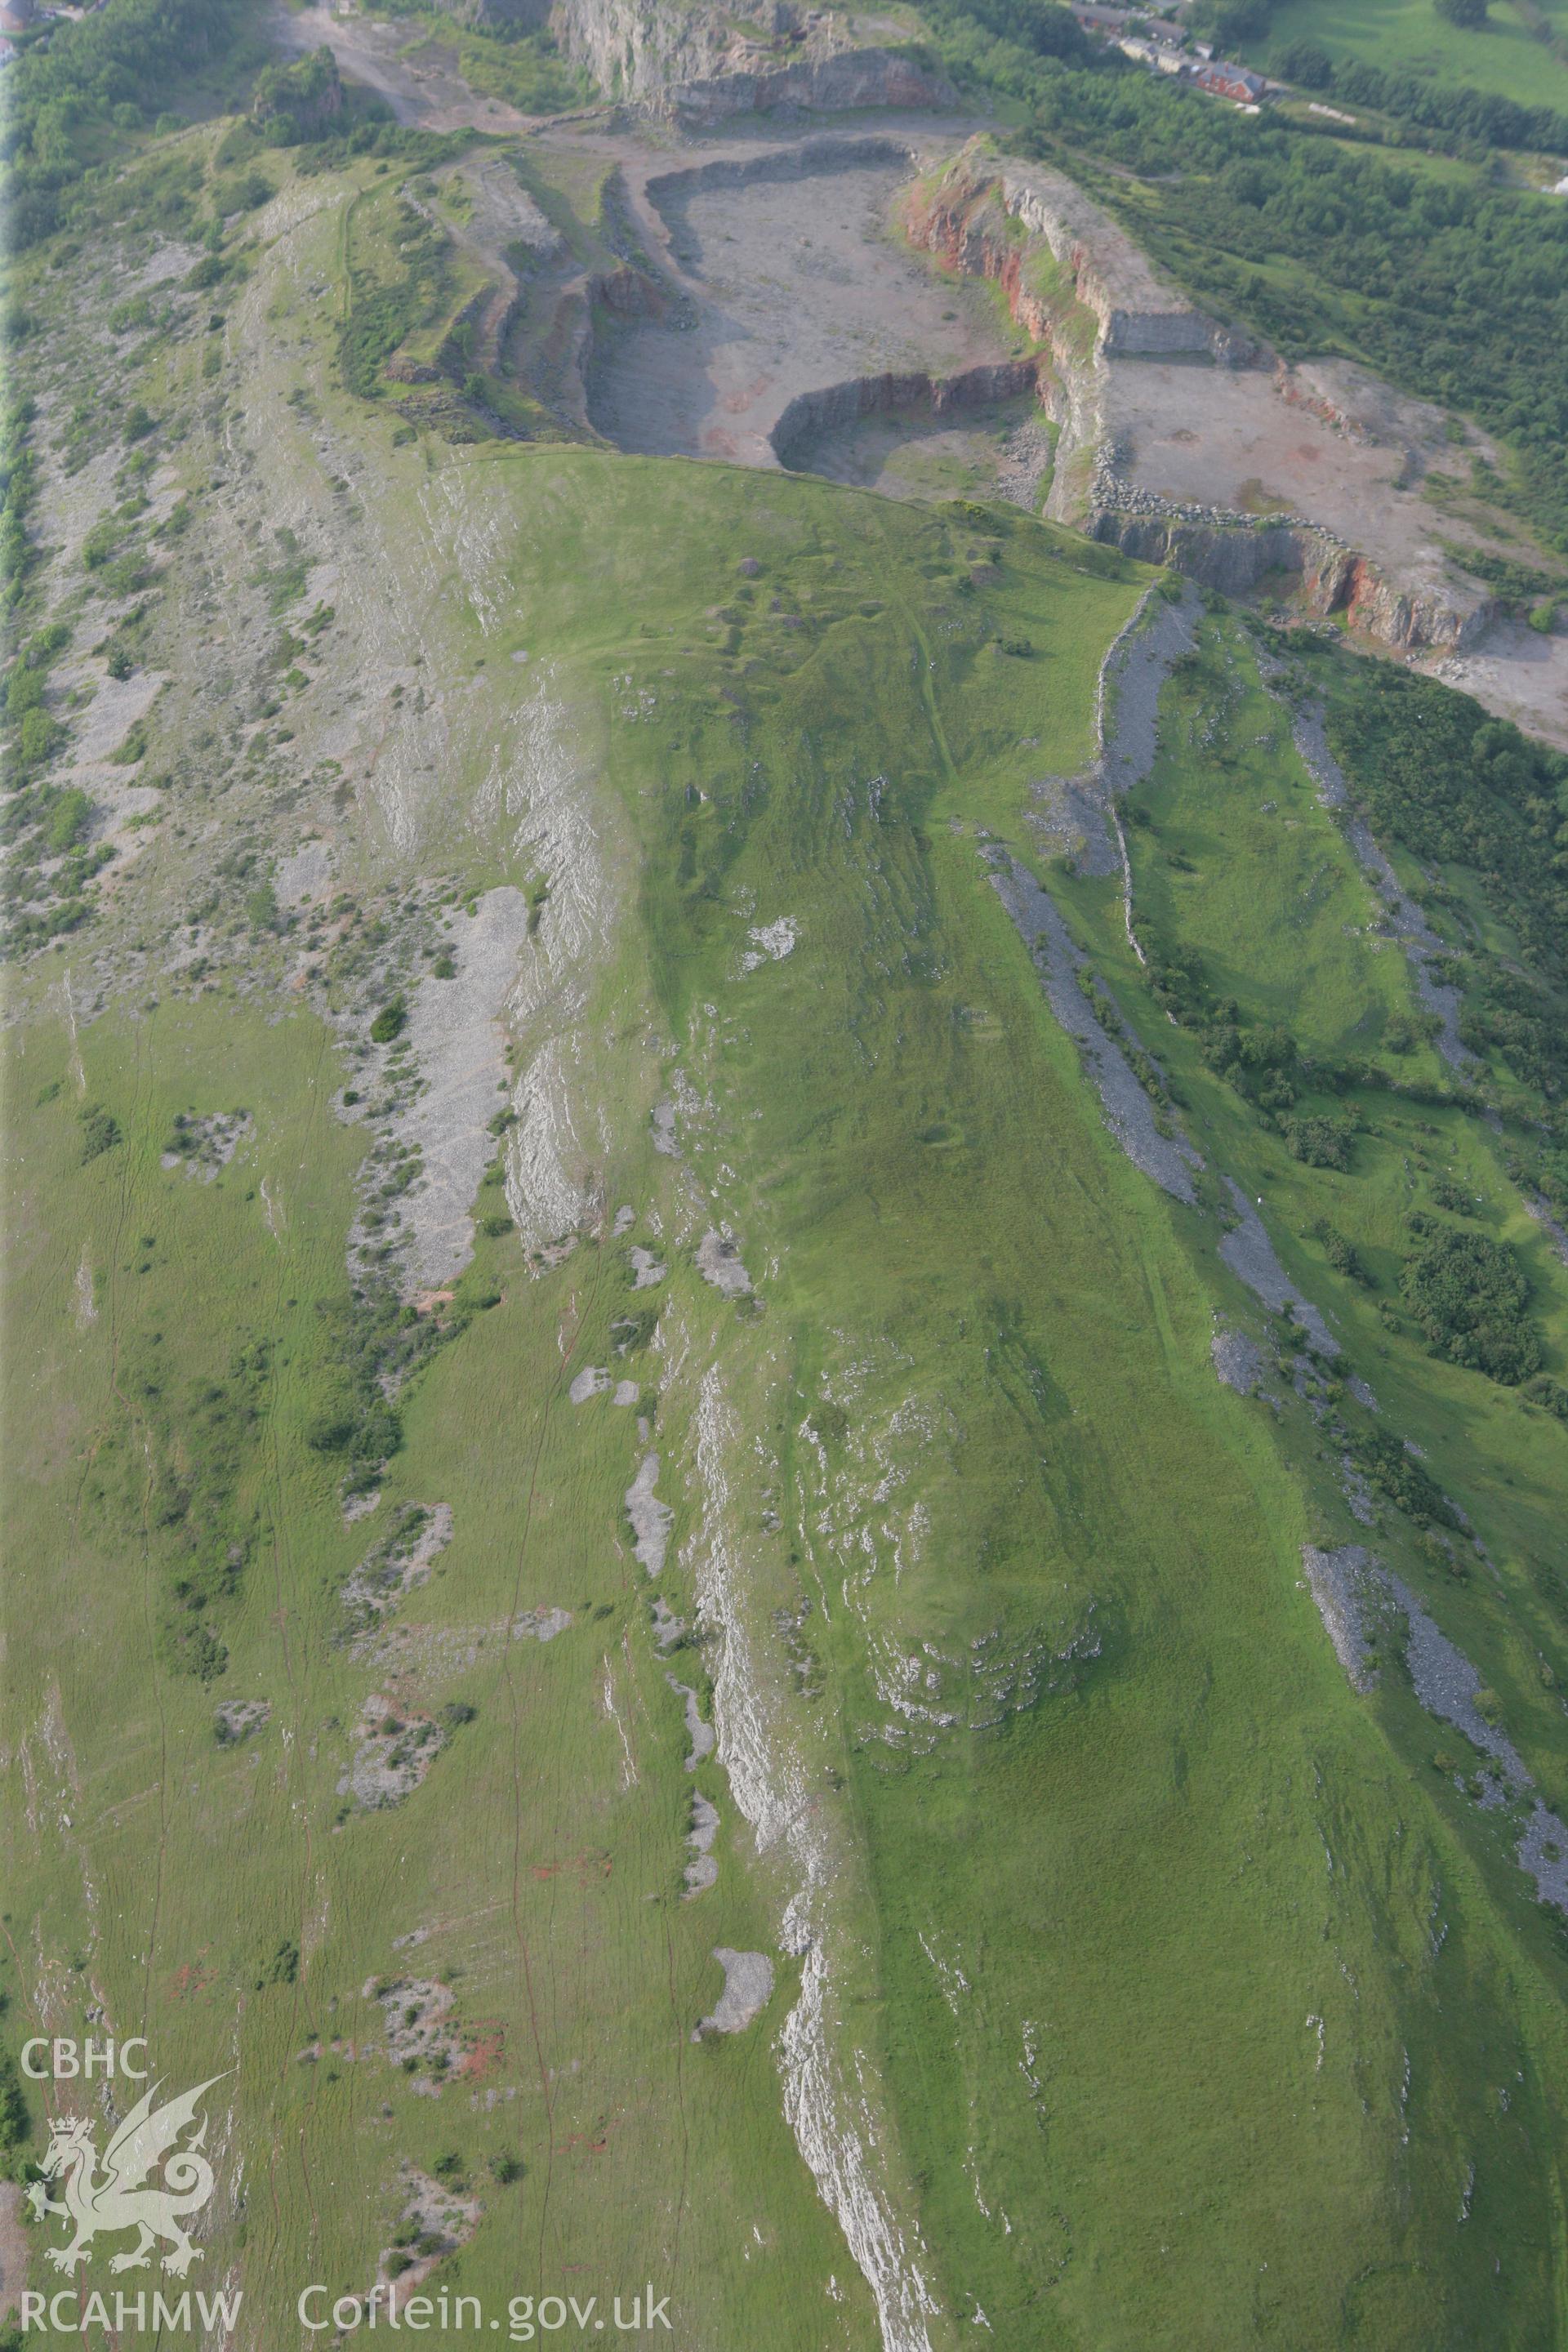 RCAHMW colour oblique photograph of Moel Hiraddug Camp. Taken by Toby Driver on 24/07/2008.